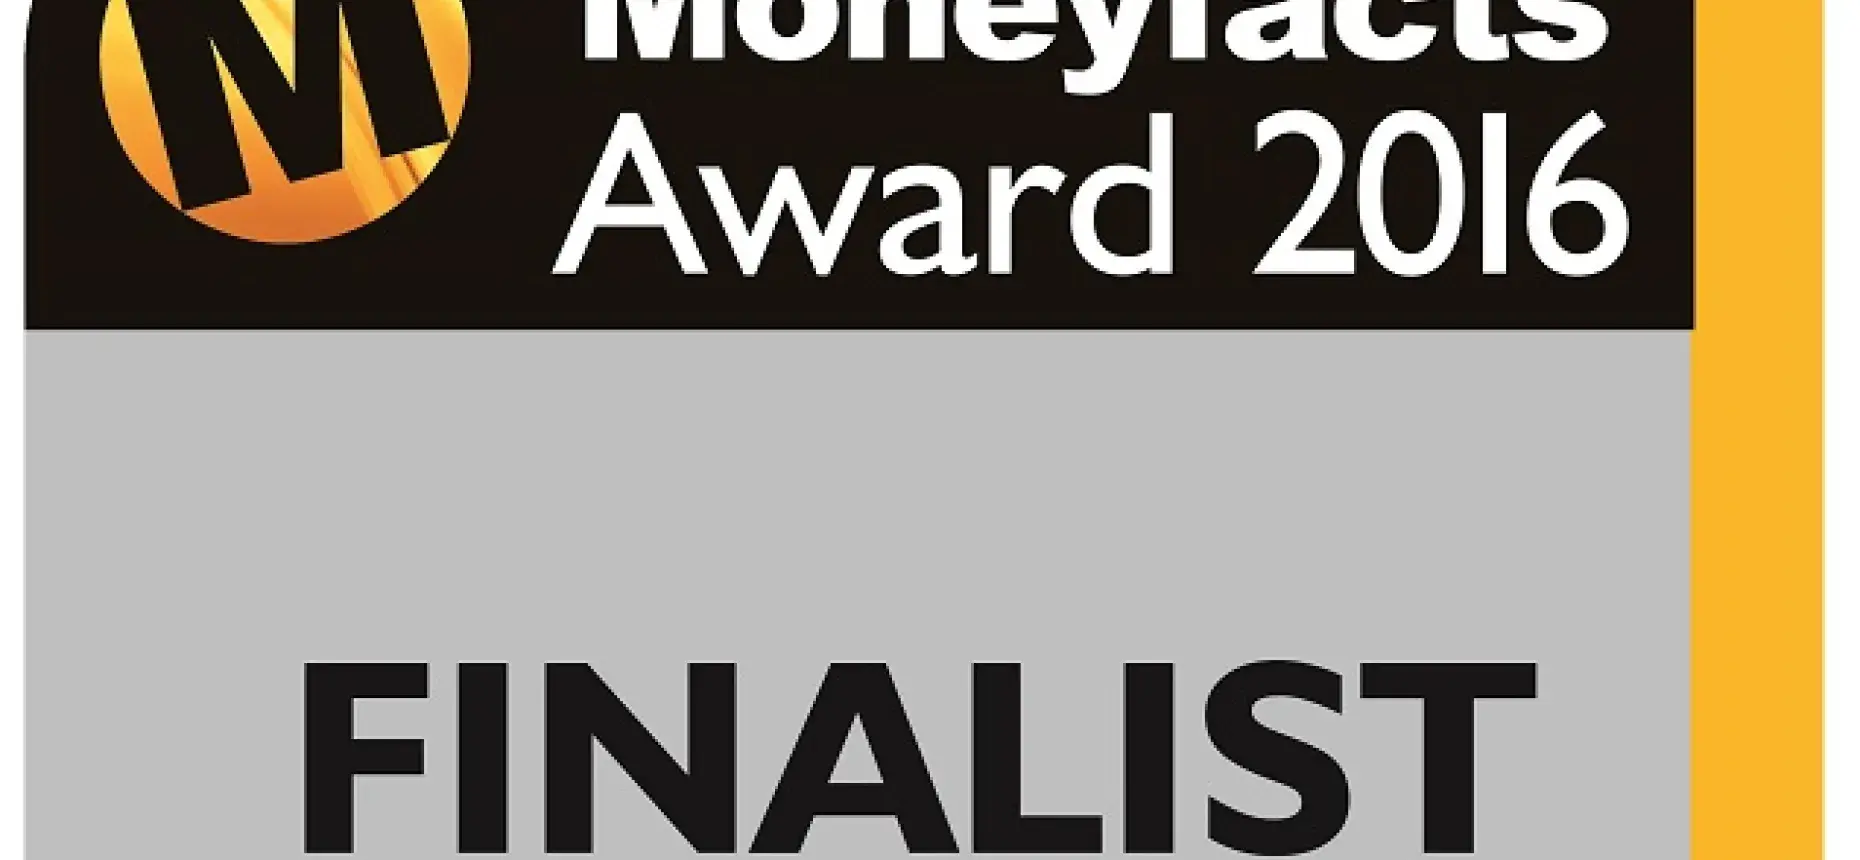 Investment Life And Pensions Moneyfacts Awards 2016 logo